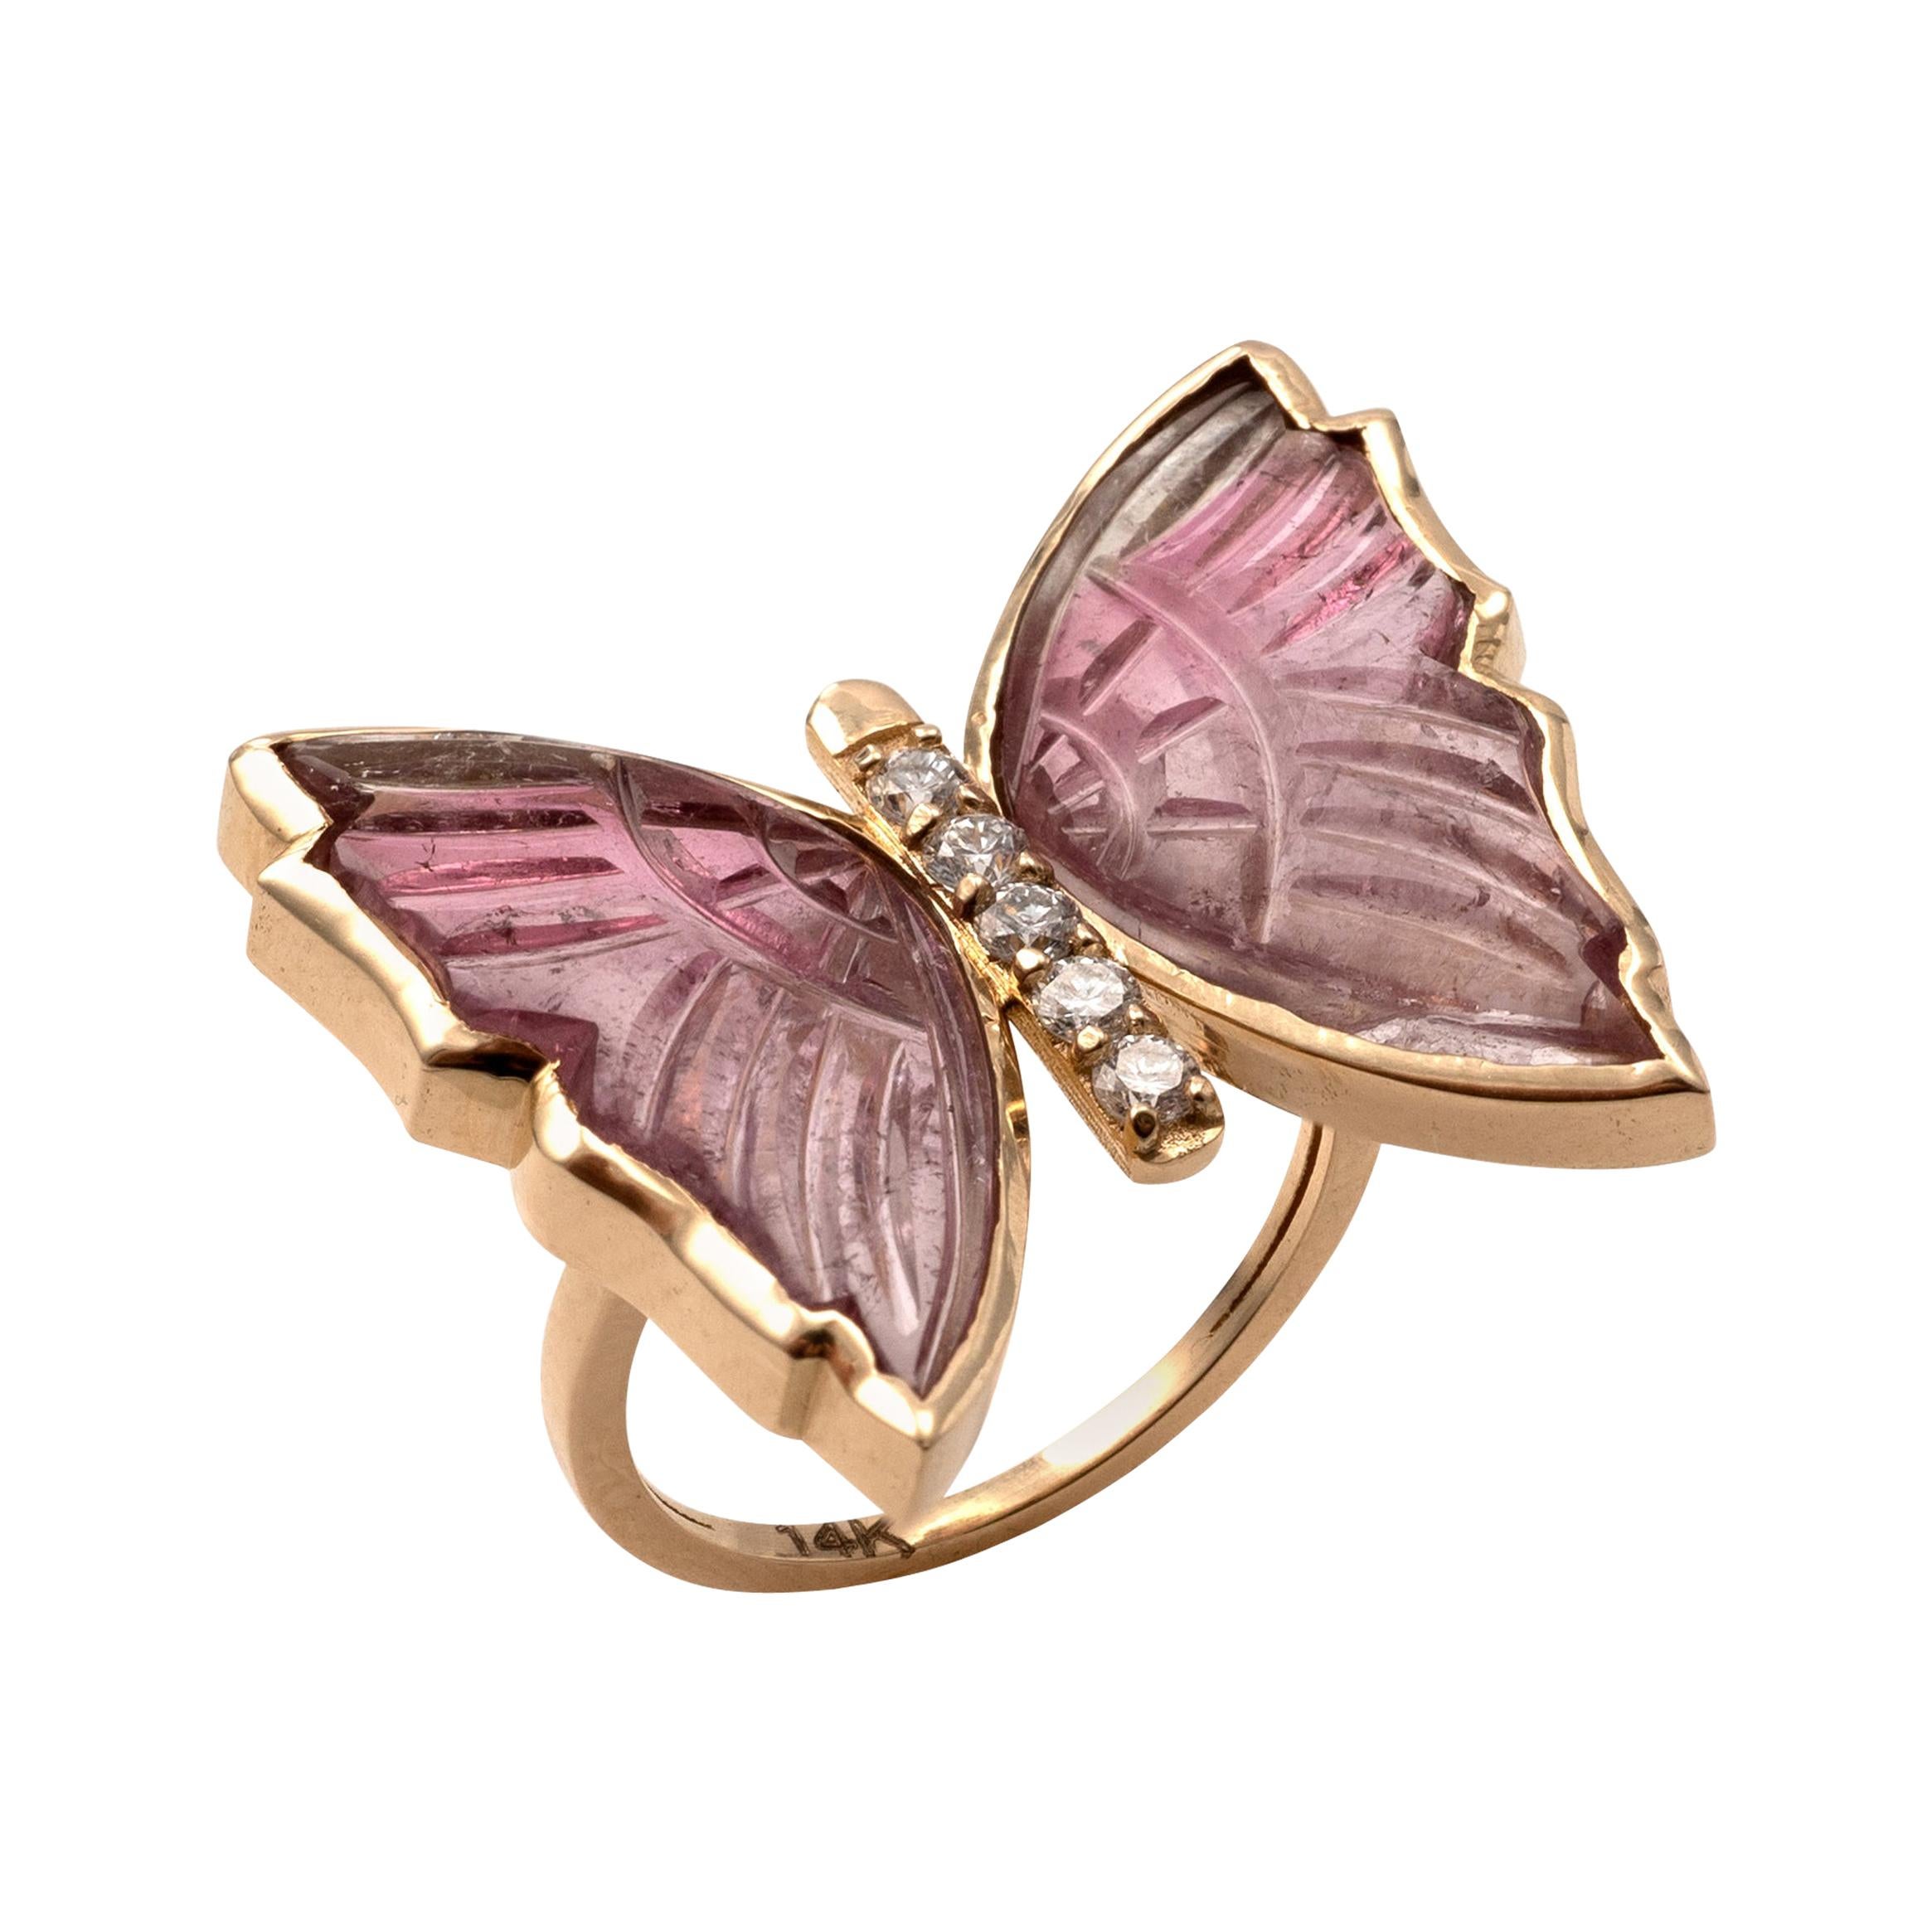 Pink Tourmaline Butterfly Ring with Diamonds, Crafted in 14 Karat Yellow Gold